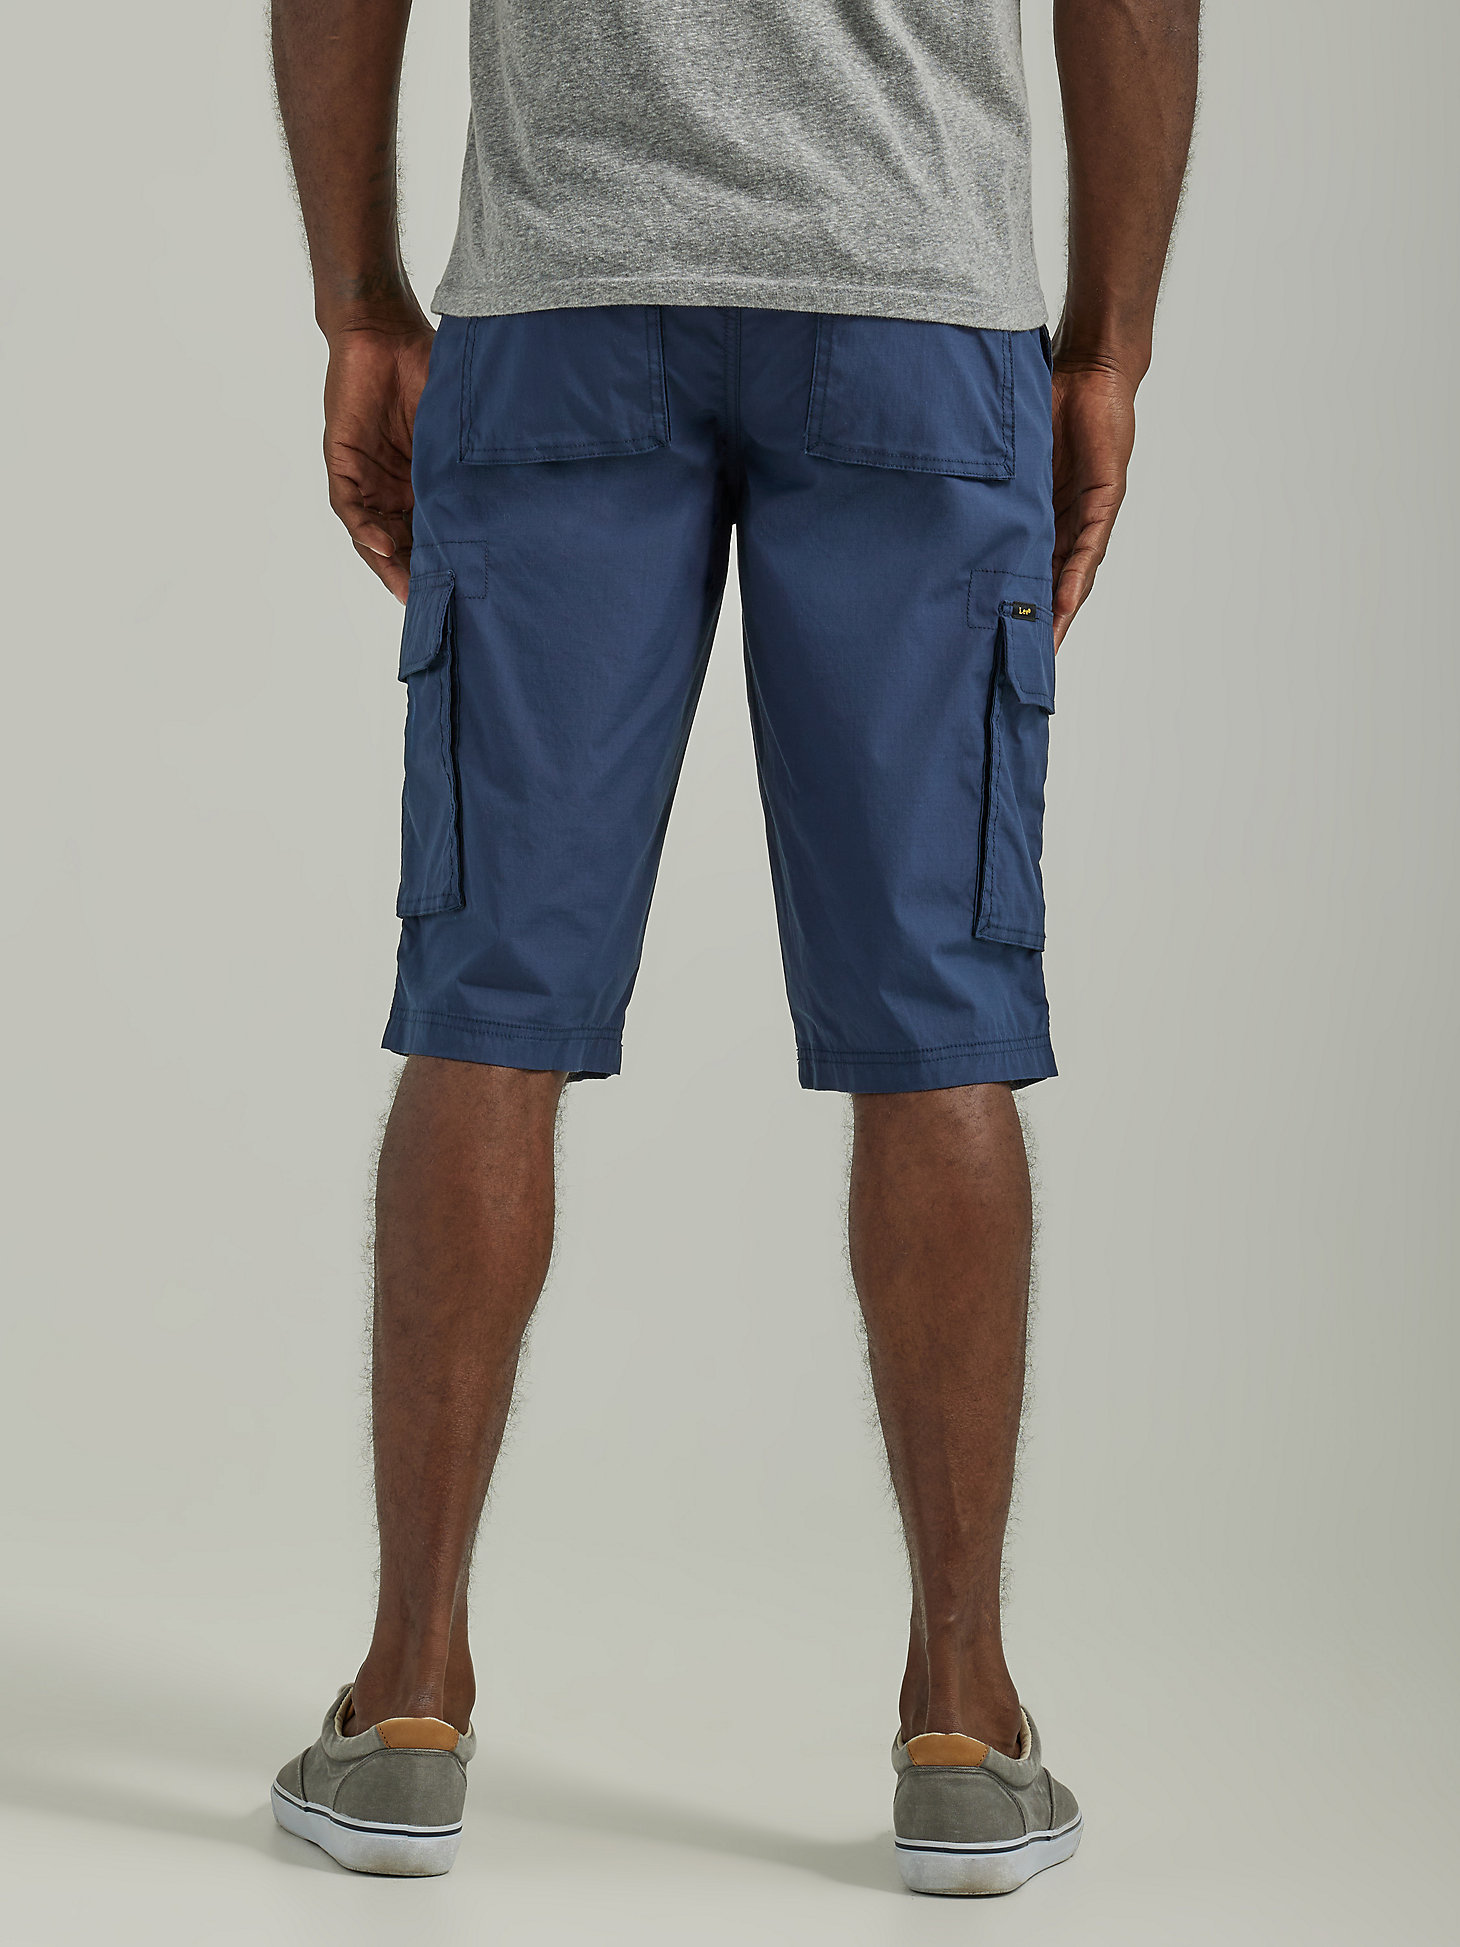 Men's Extreme Motion Cameron Relaxed Fit Cargo Short in Navy alternative view 1